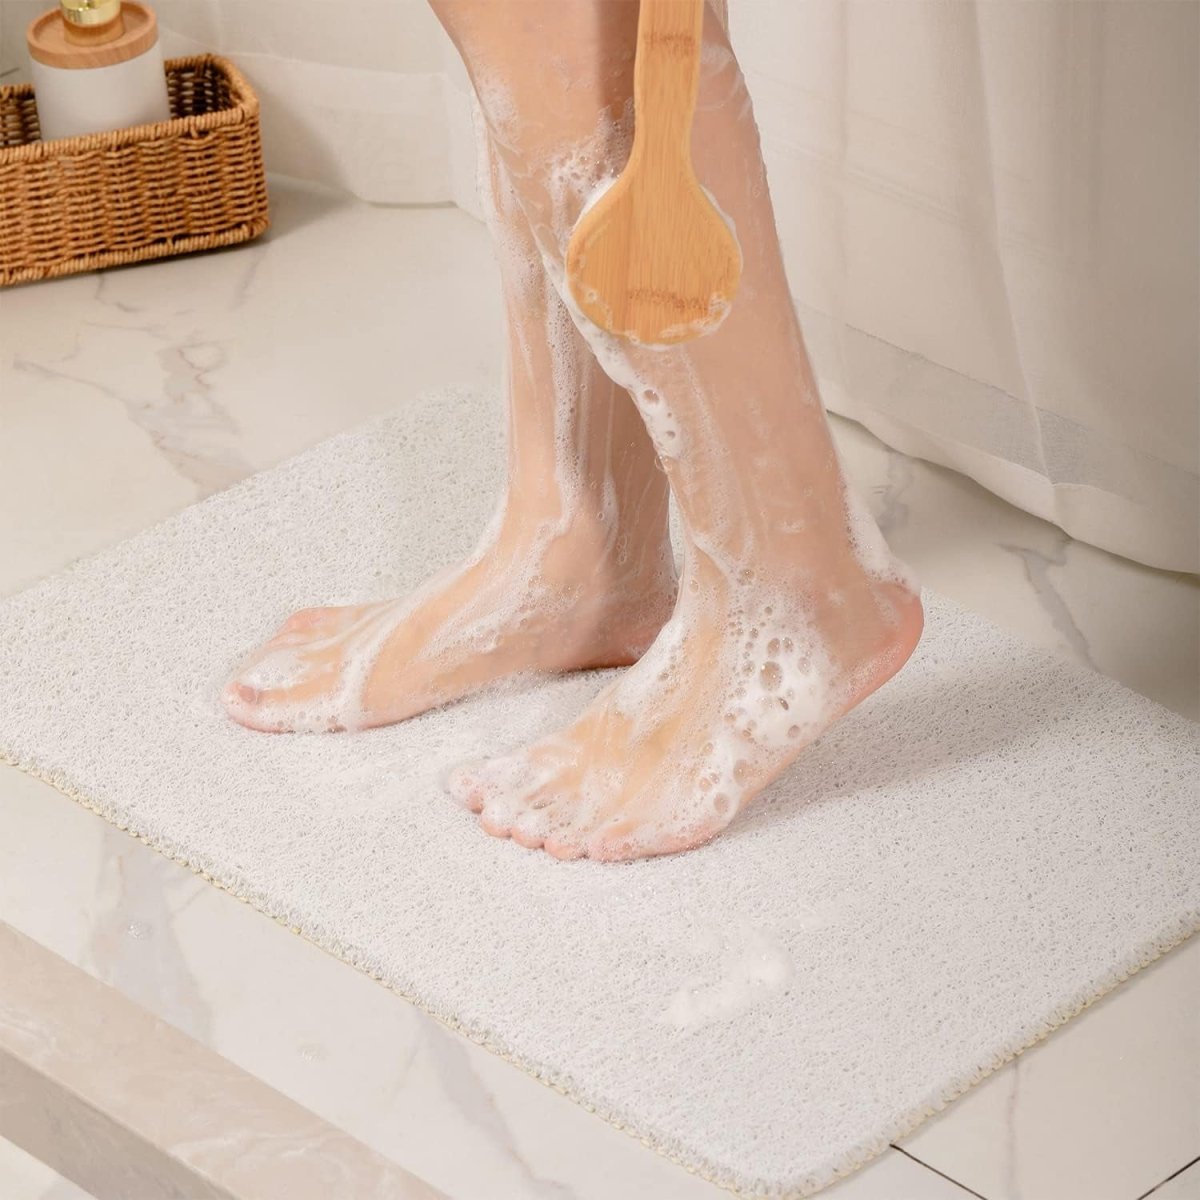 Quick-Dry Loofah Shower Mat - Non-Slip, Super Soft, and Mold